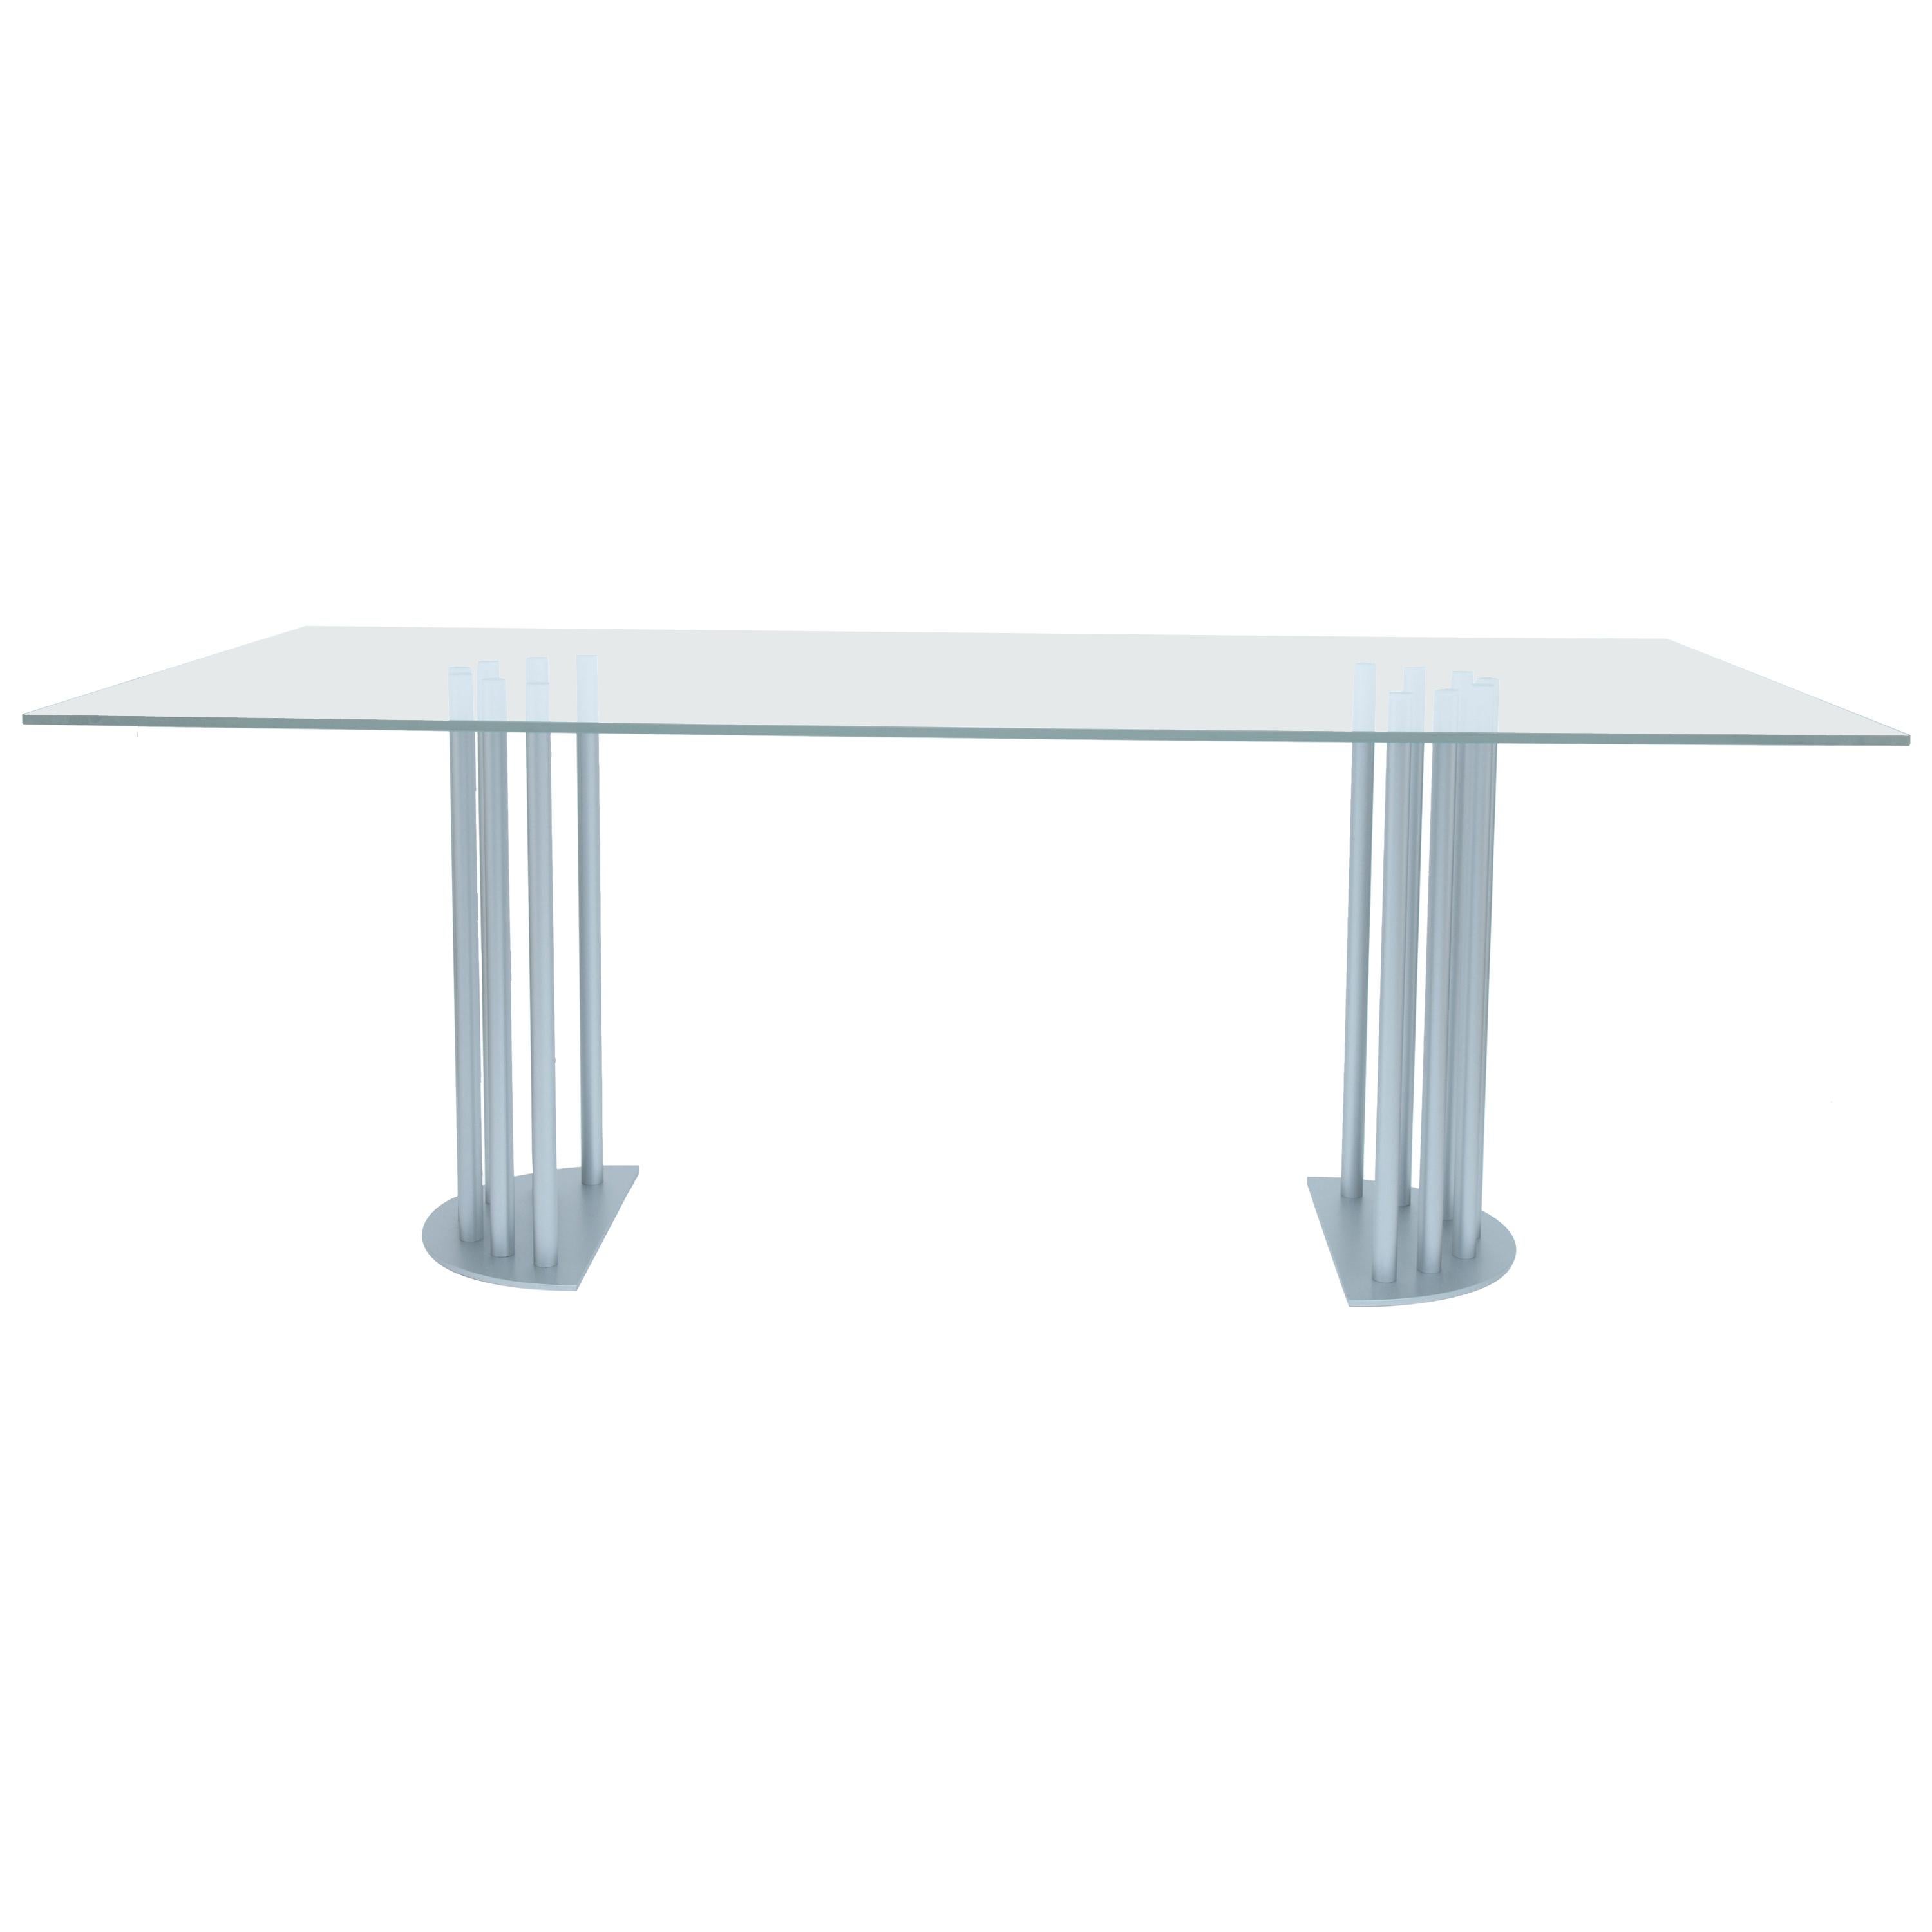 Ela Rectangular Luxury Table, Metal Half Round Base and Glass Top, Made in Italy